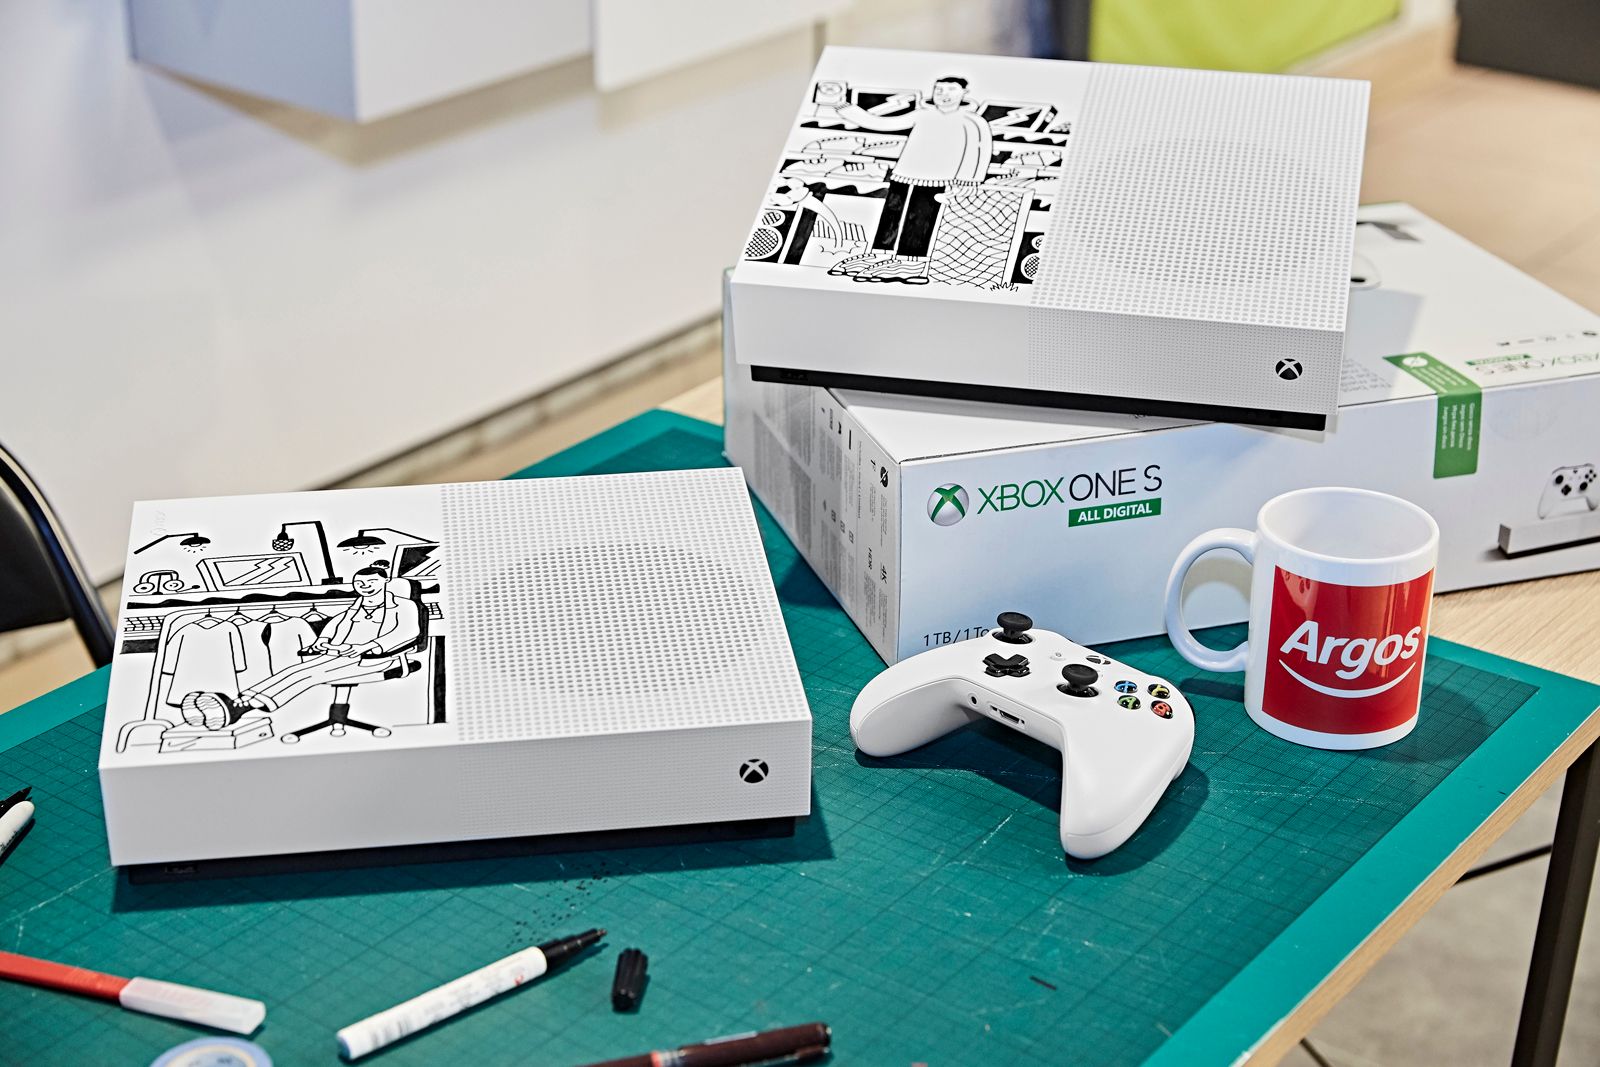 Argos is offering some lucky punters the chance to grab an Xbox One S All-Digital Edition for £3 image 1